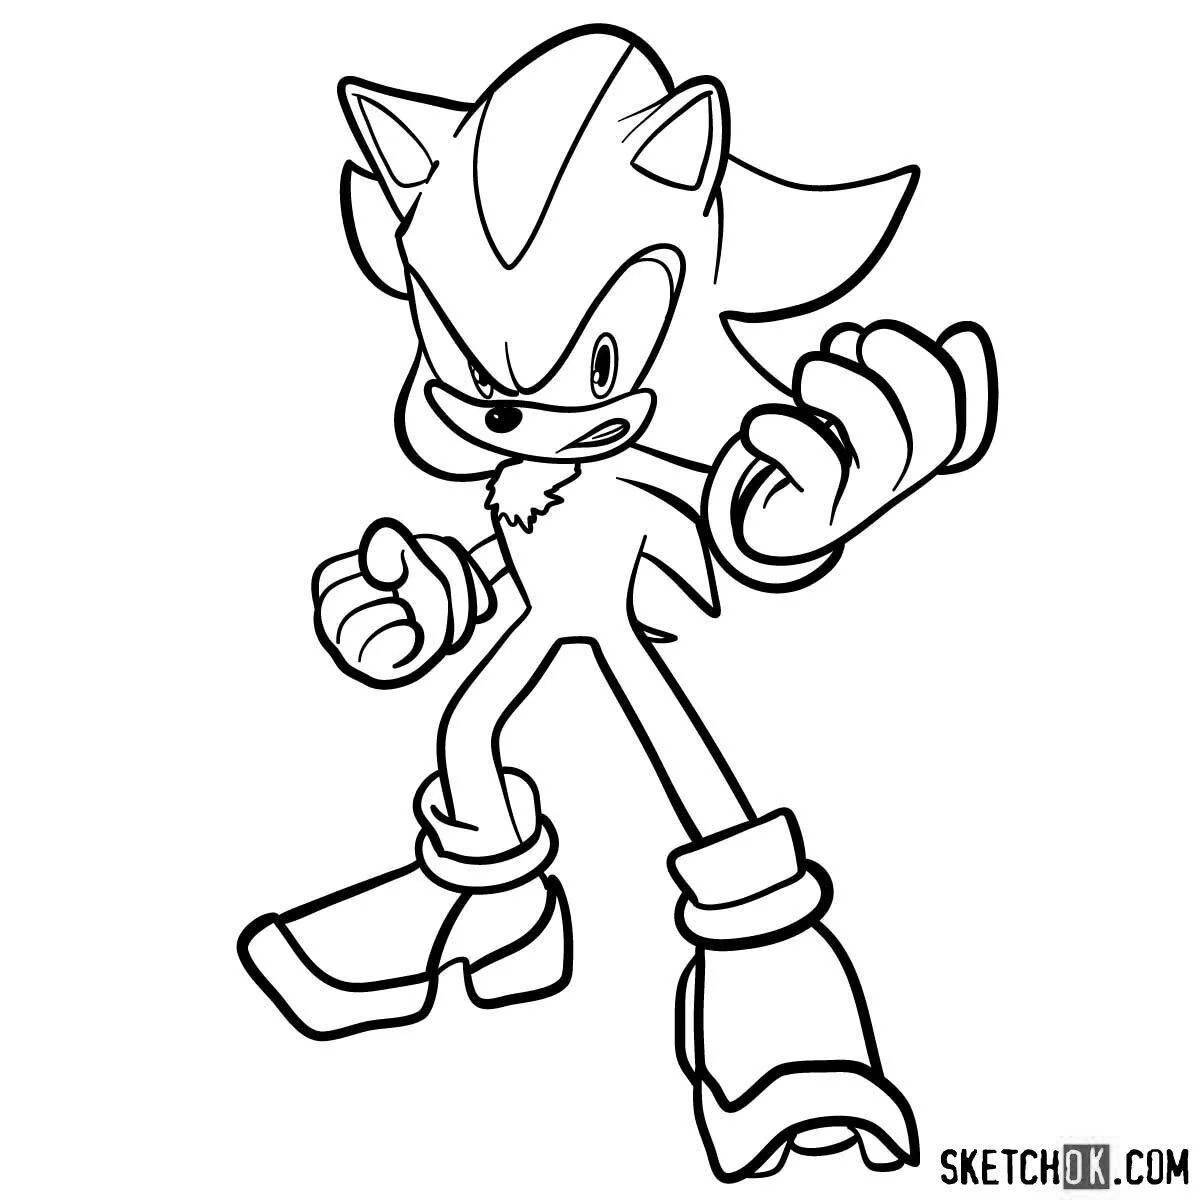 Gorgeous sonic shredder coloring page